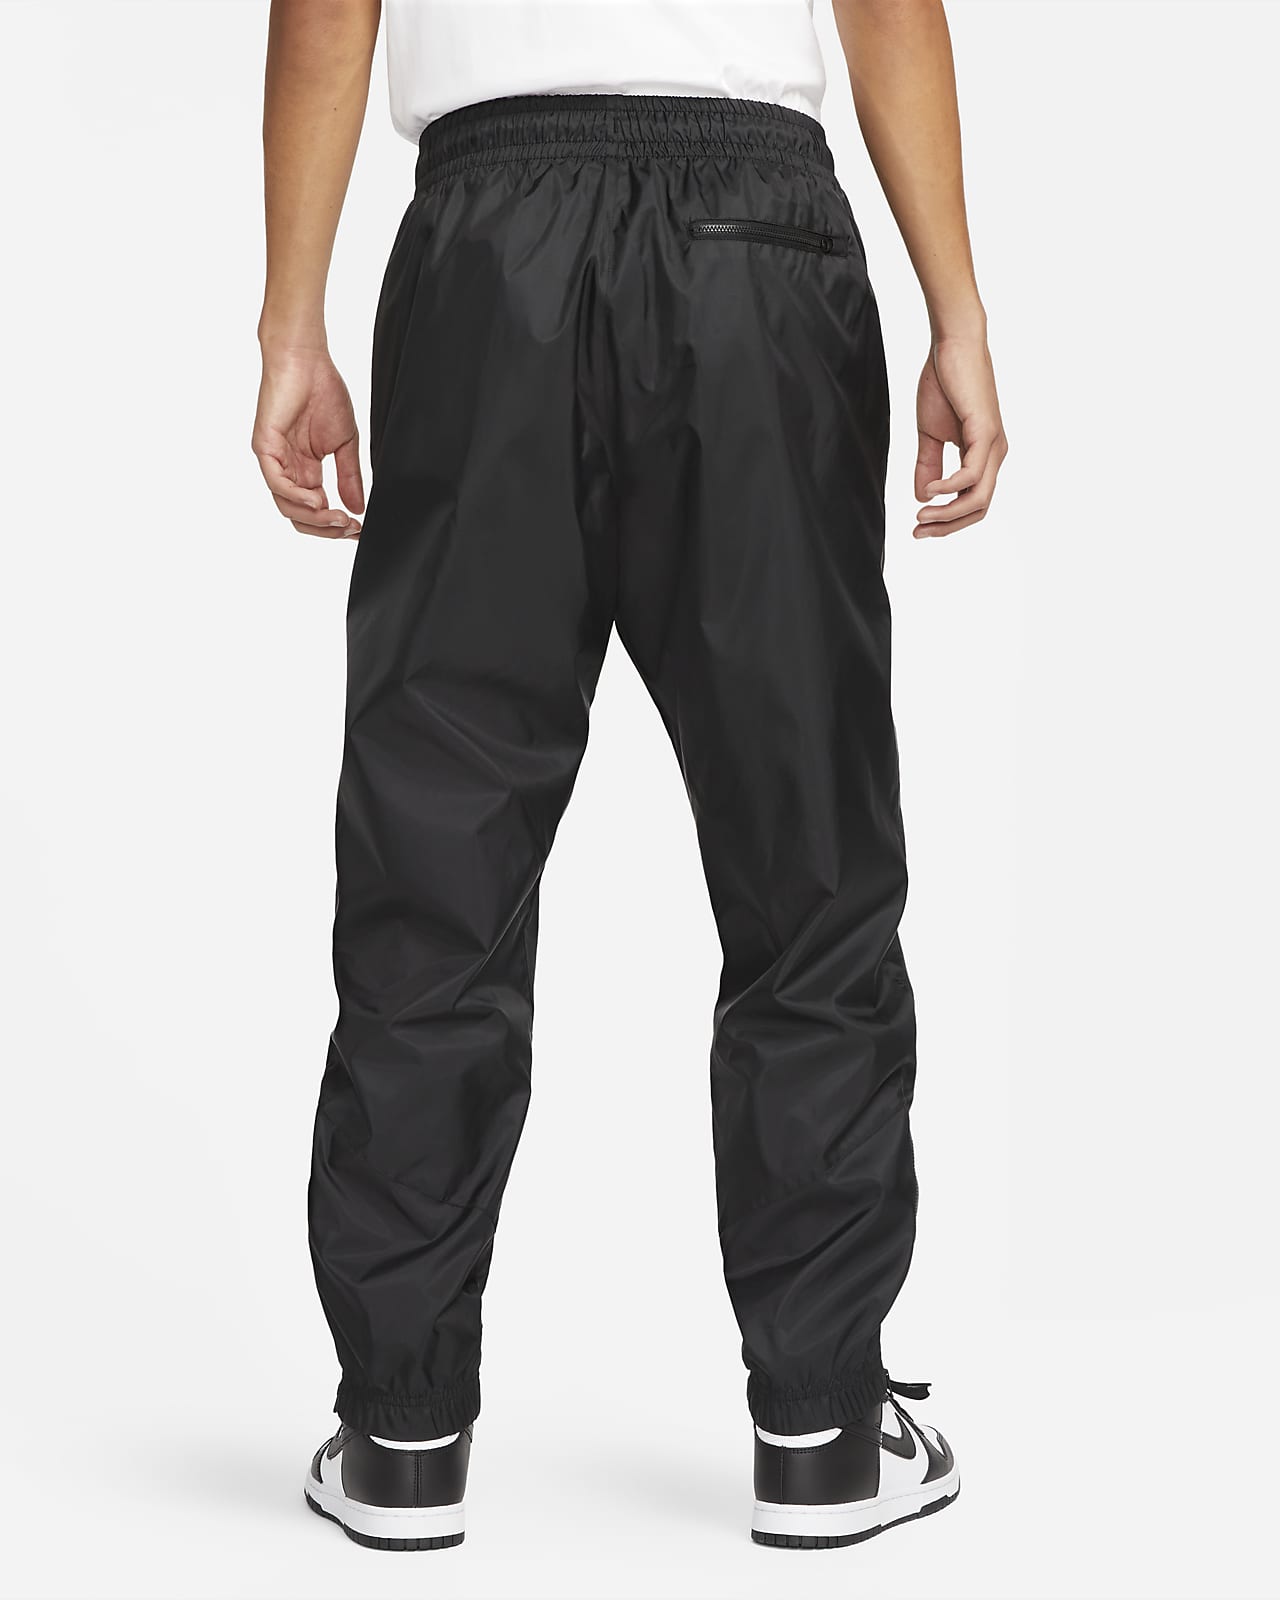 windrunner woven lined trousers 0CrD4X